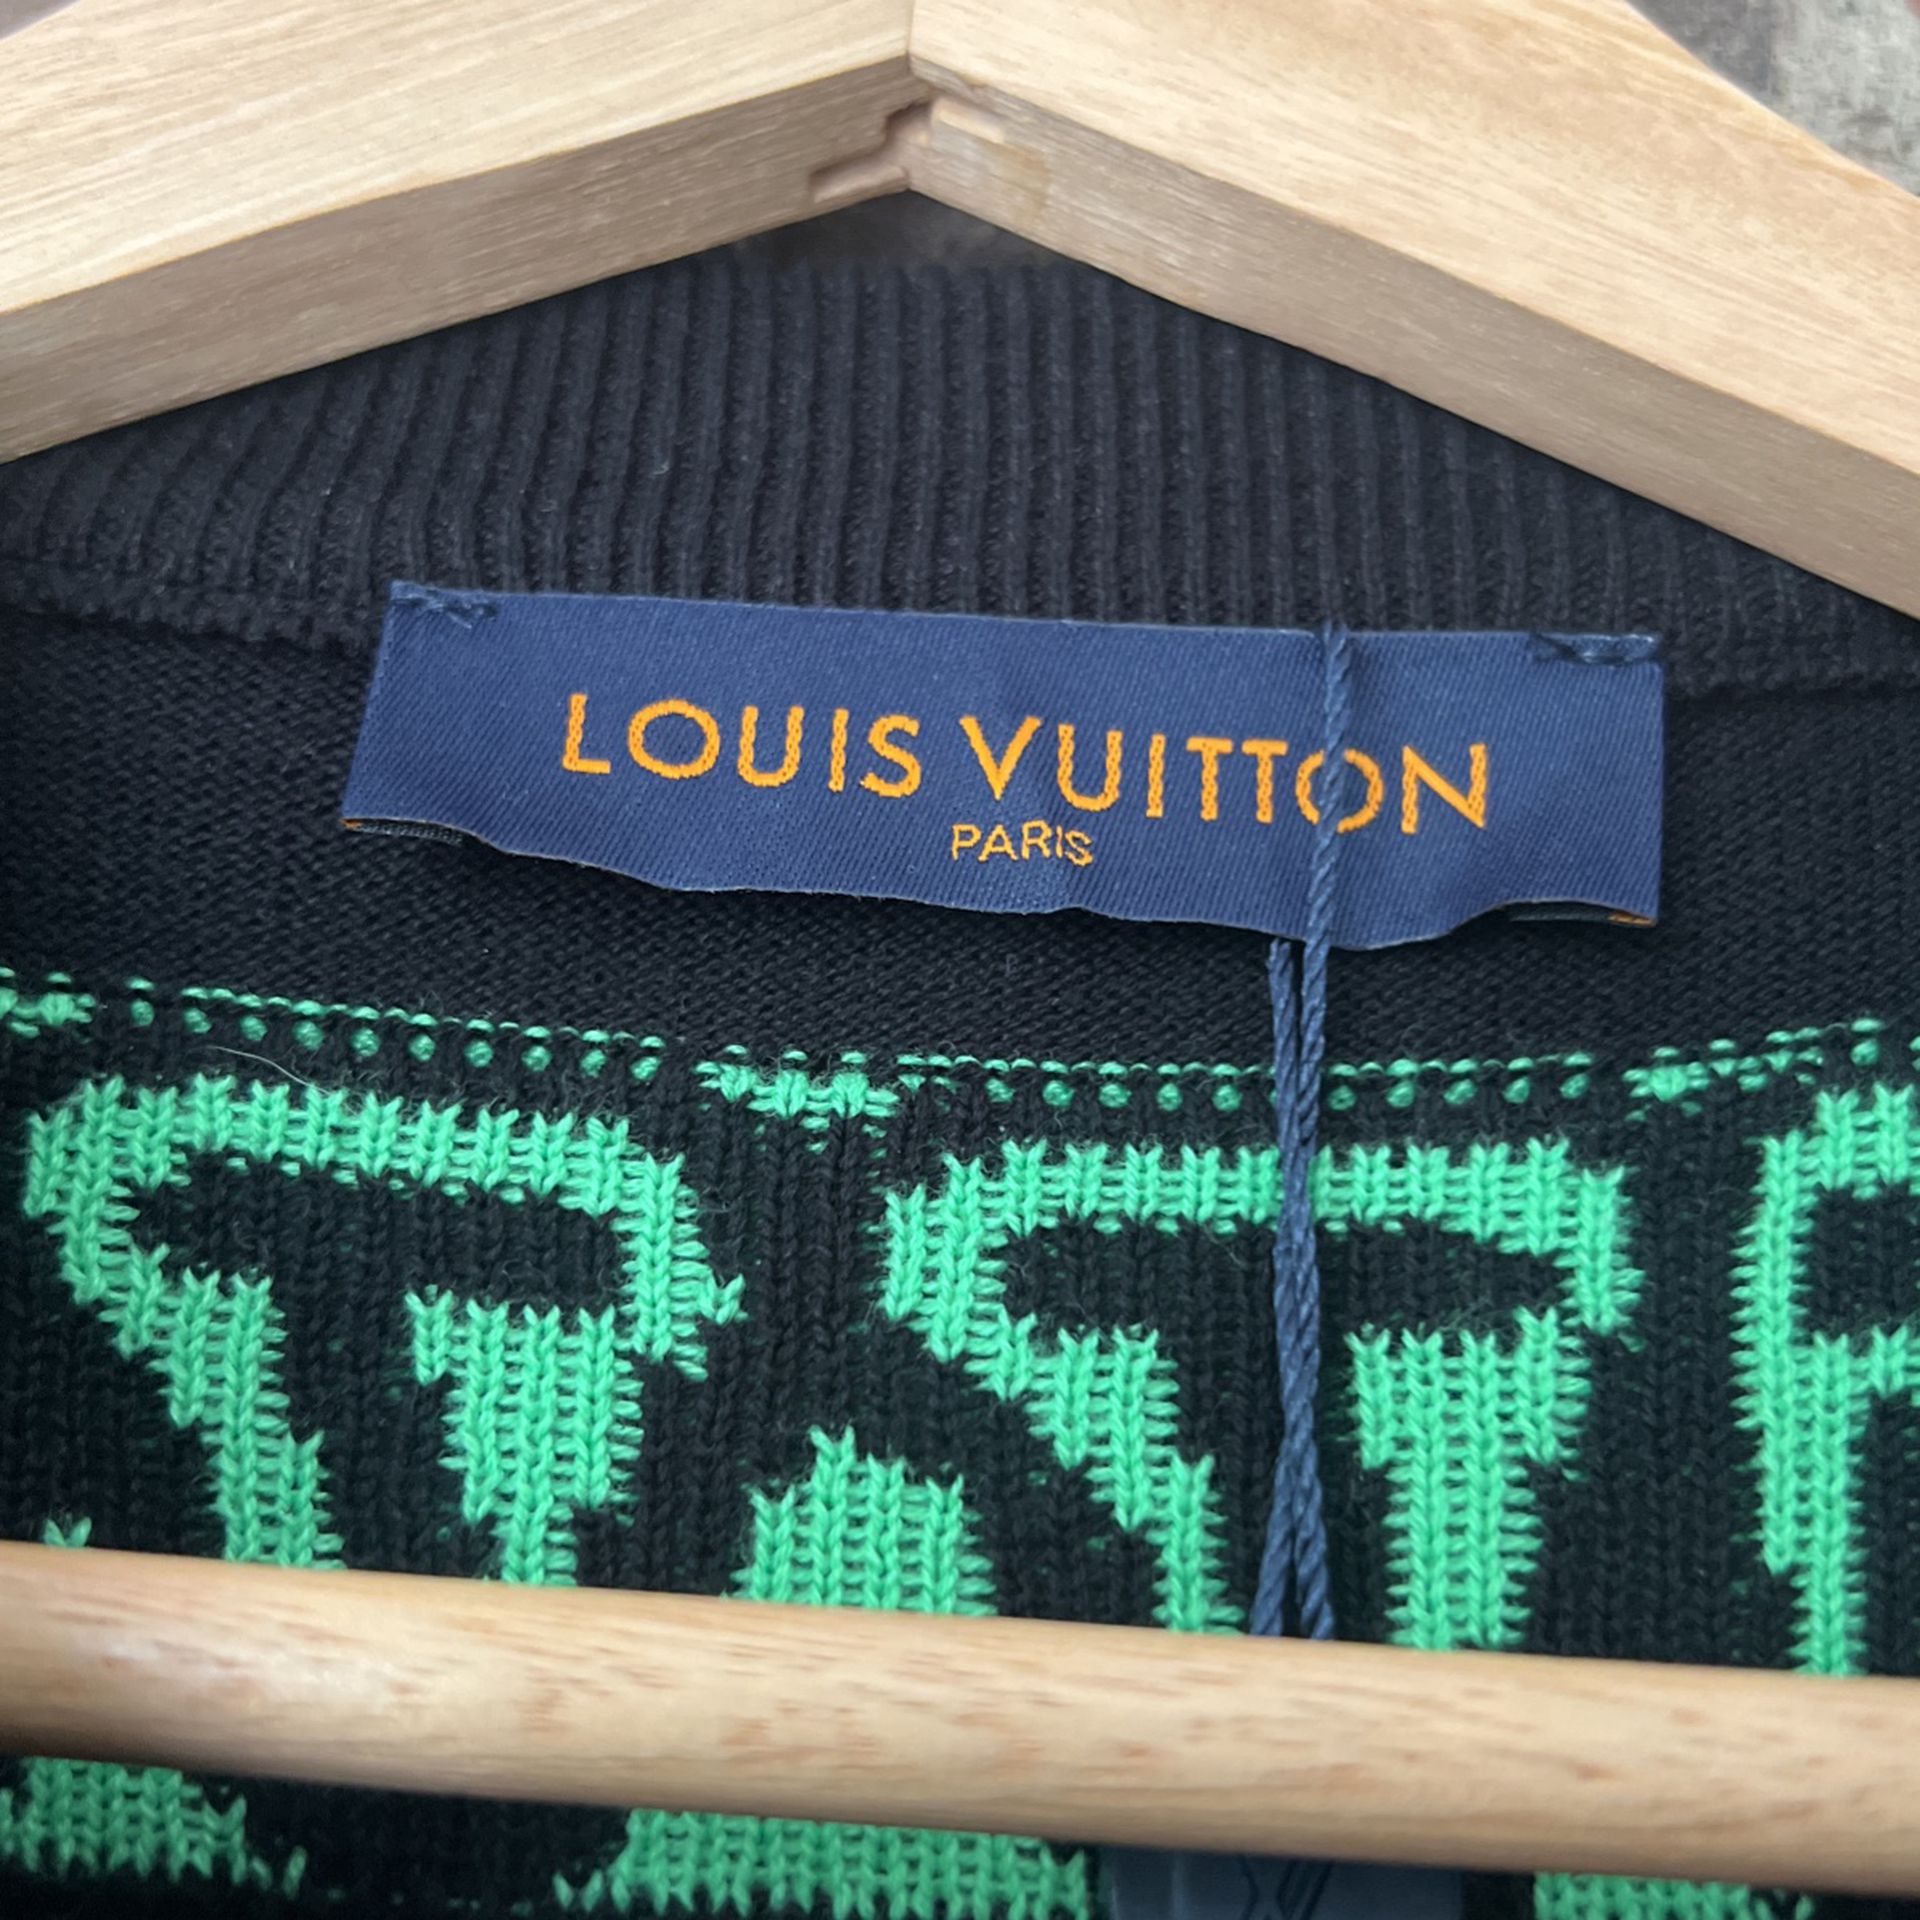 Louis Vuitton 1854 Graphic Knit Tee Shirt Brand New Size L for